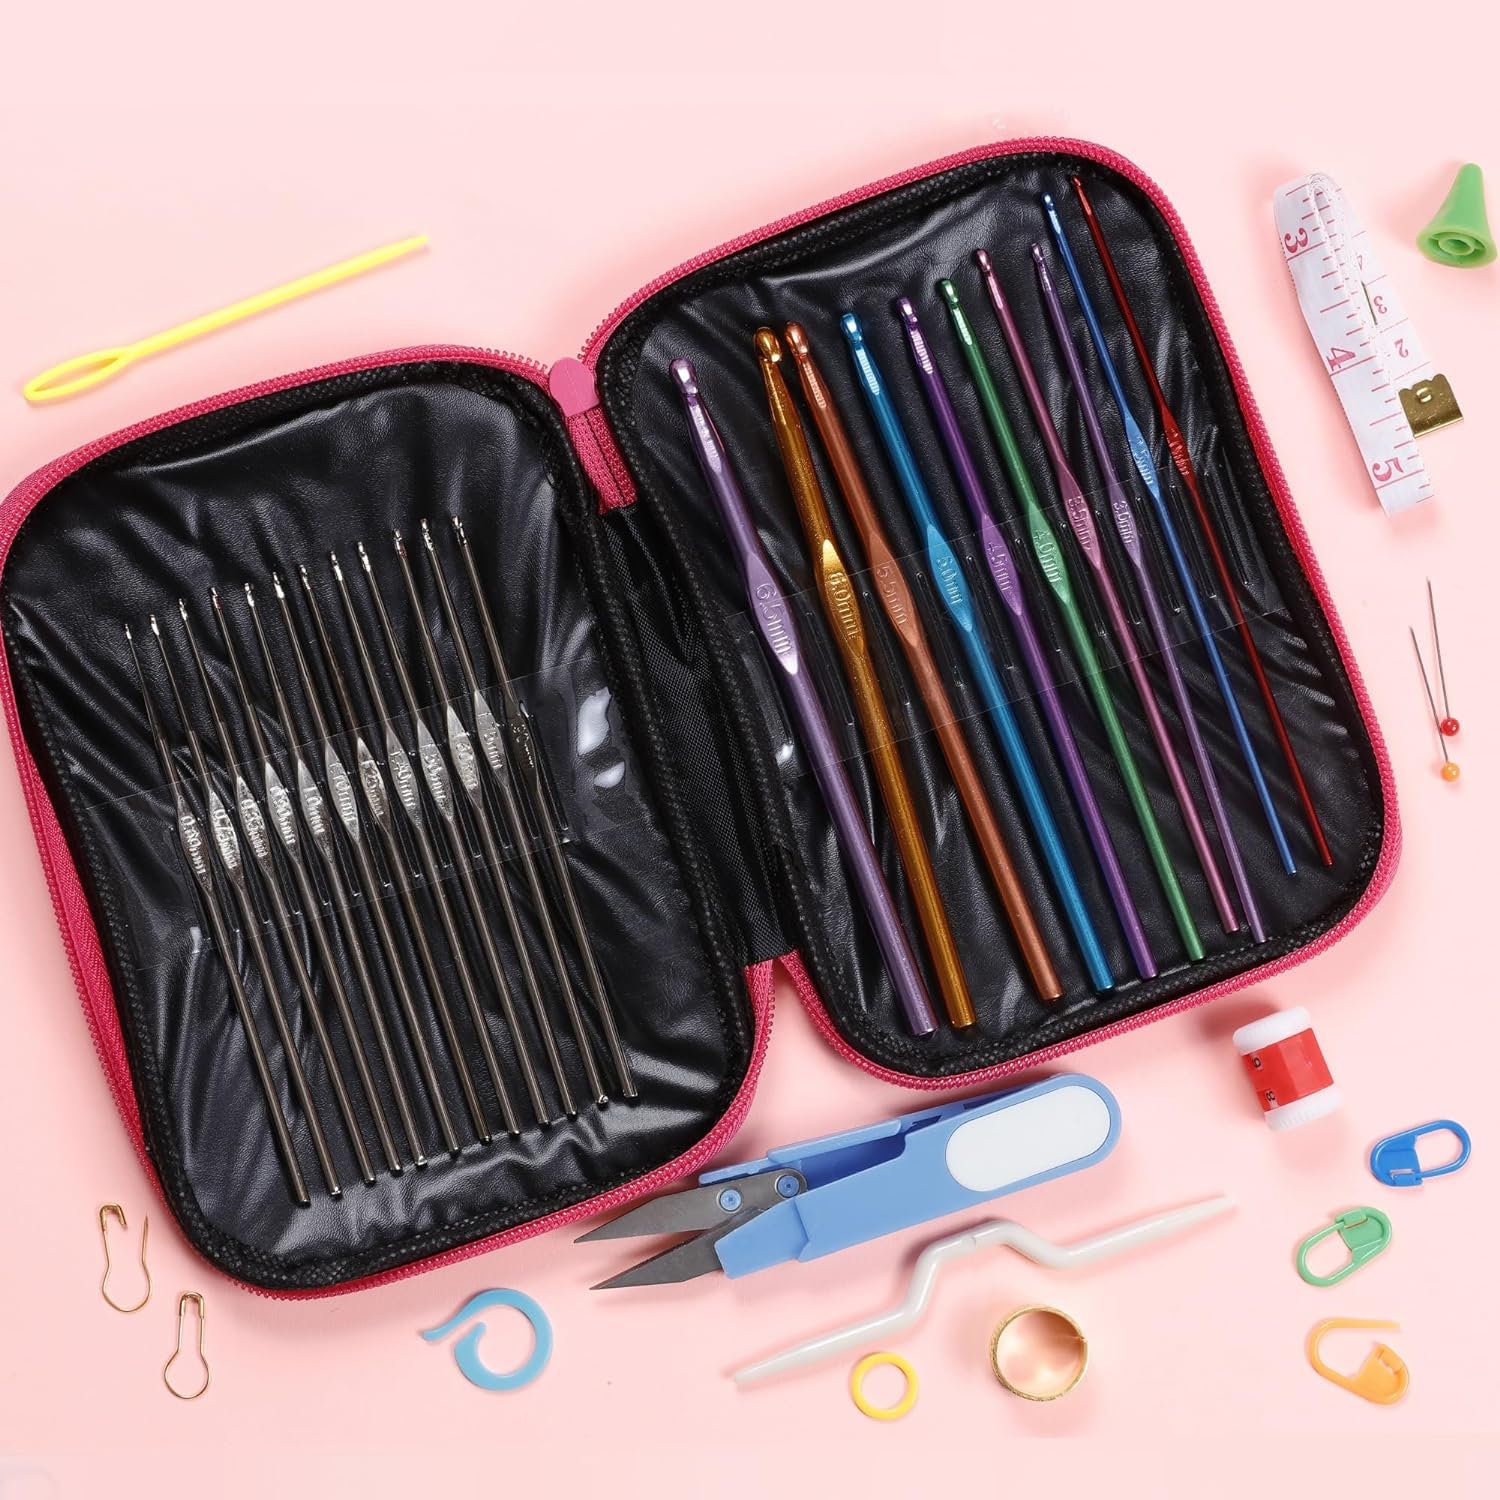 Incraftables Sewing Kit for Adults with 30pcs Multicolor Threads & Needles.  Best Emergency Travel Basic Sewing Kits. Hand Sewing Kit for Beginner 